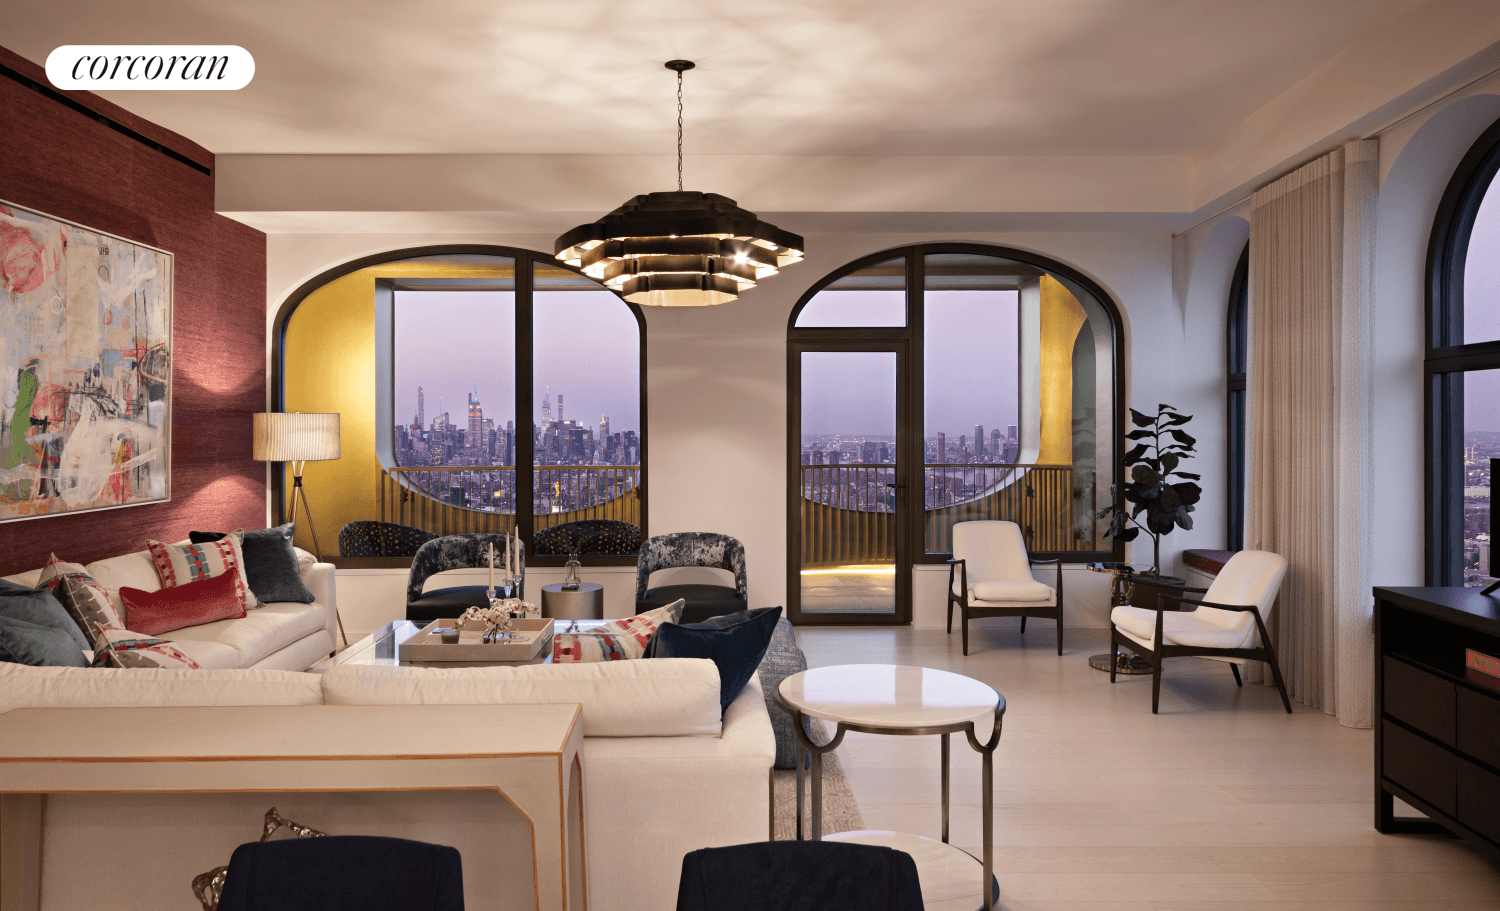 Welcome to the breathtaking and luxurious 130 William, an architectural masterpiece created by the renowned visionary architect Sir David Adjaye.